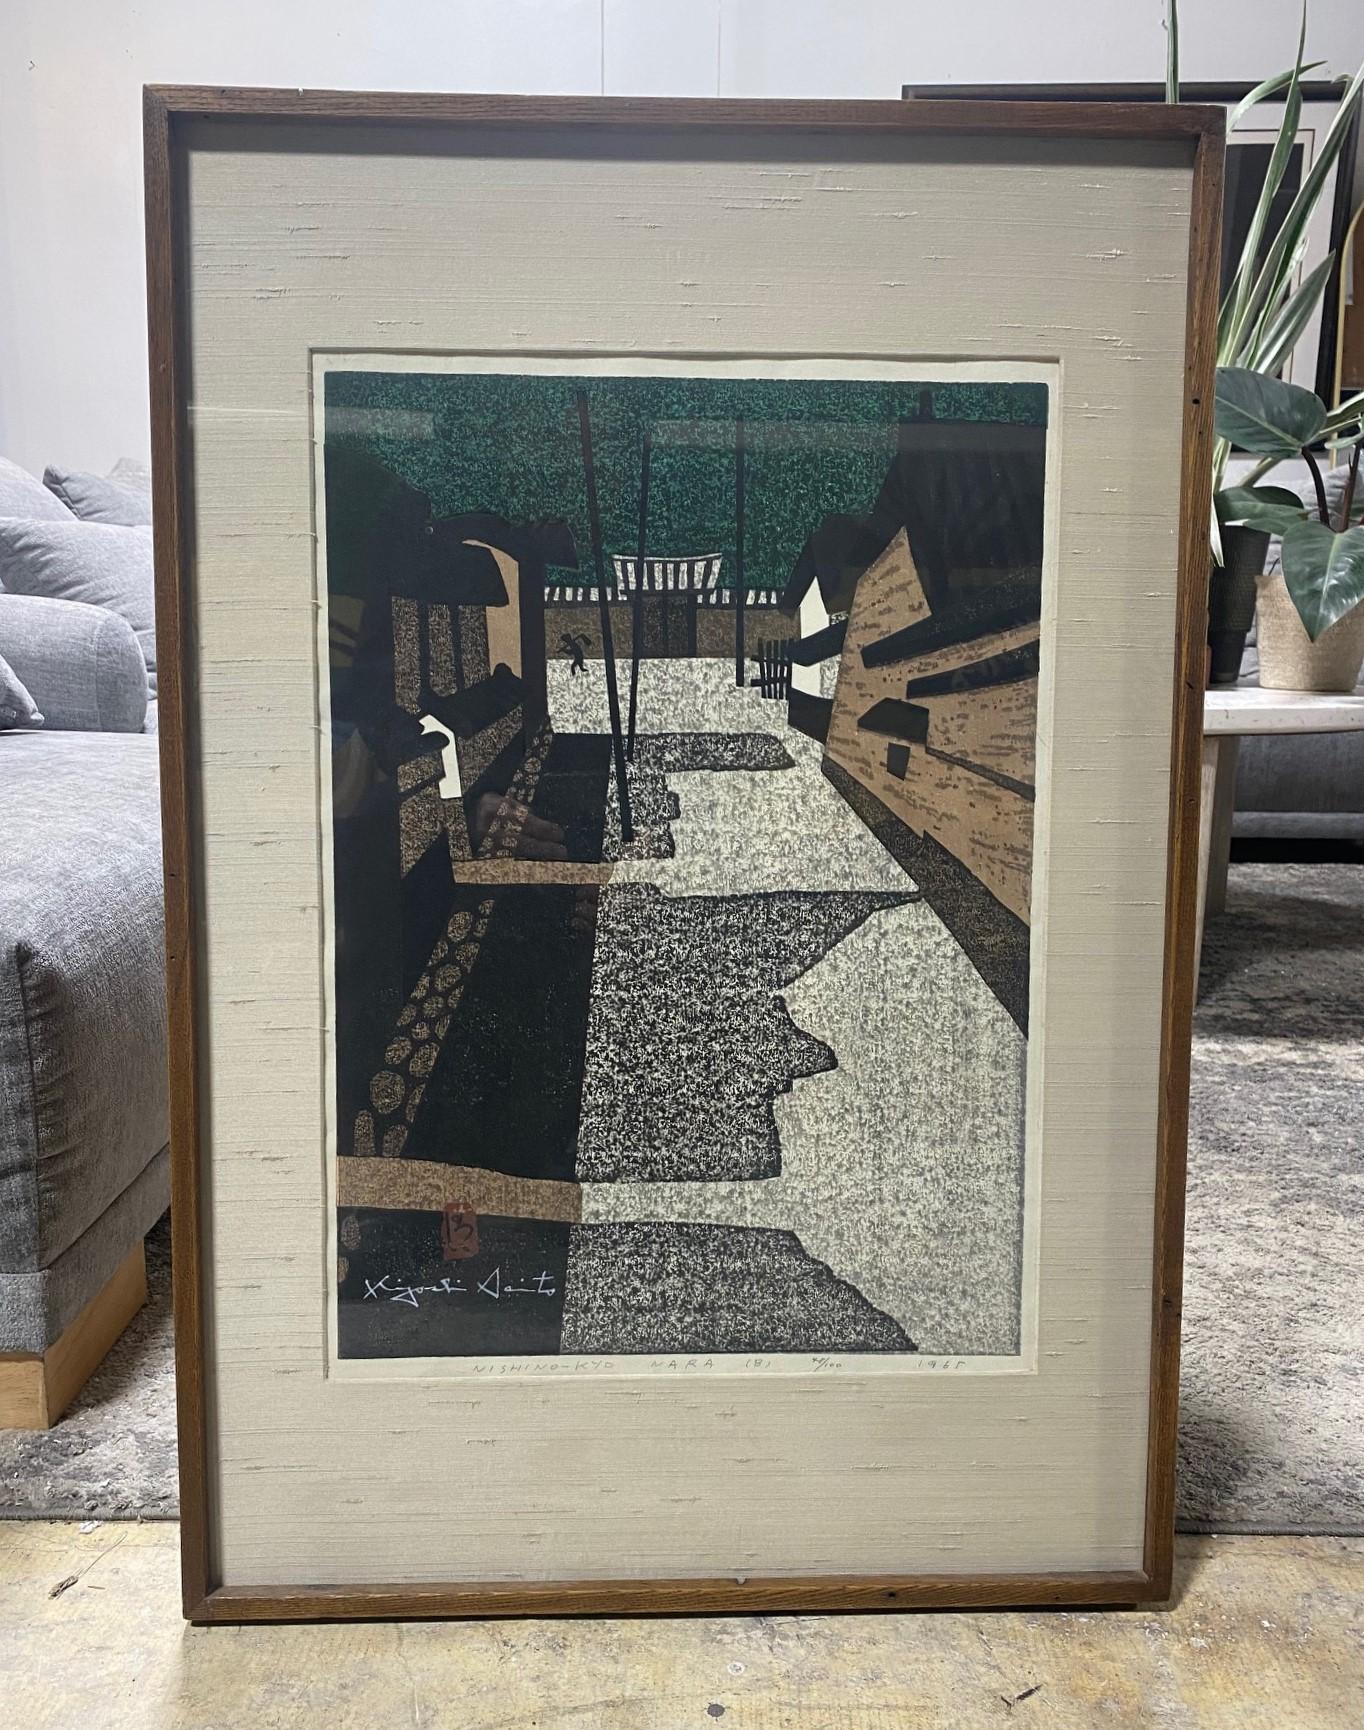 A beautifully designed and composed woodblock print by famed Japanese printmaker Kiyoshi Saito. Many consider Saito to be one of the most important, if not the most important, contemporary Japanese printmakers of the 20th century. This print, which